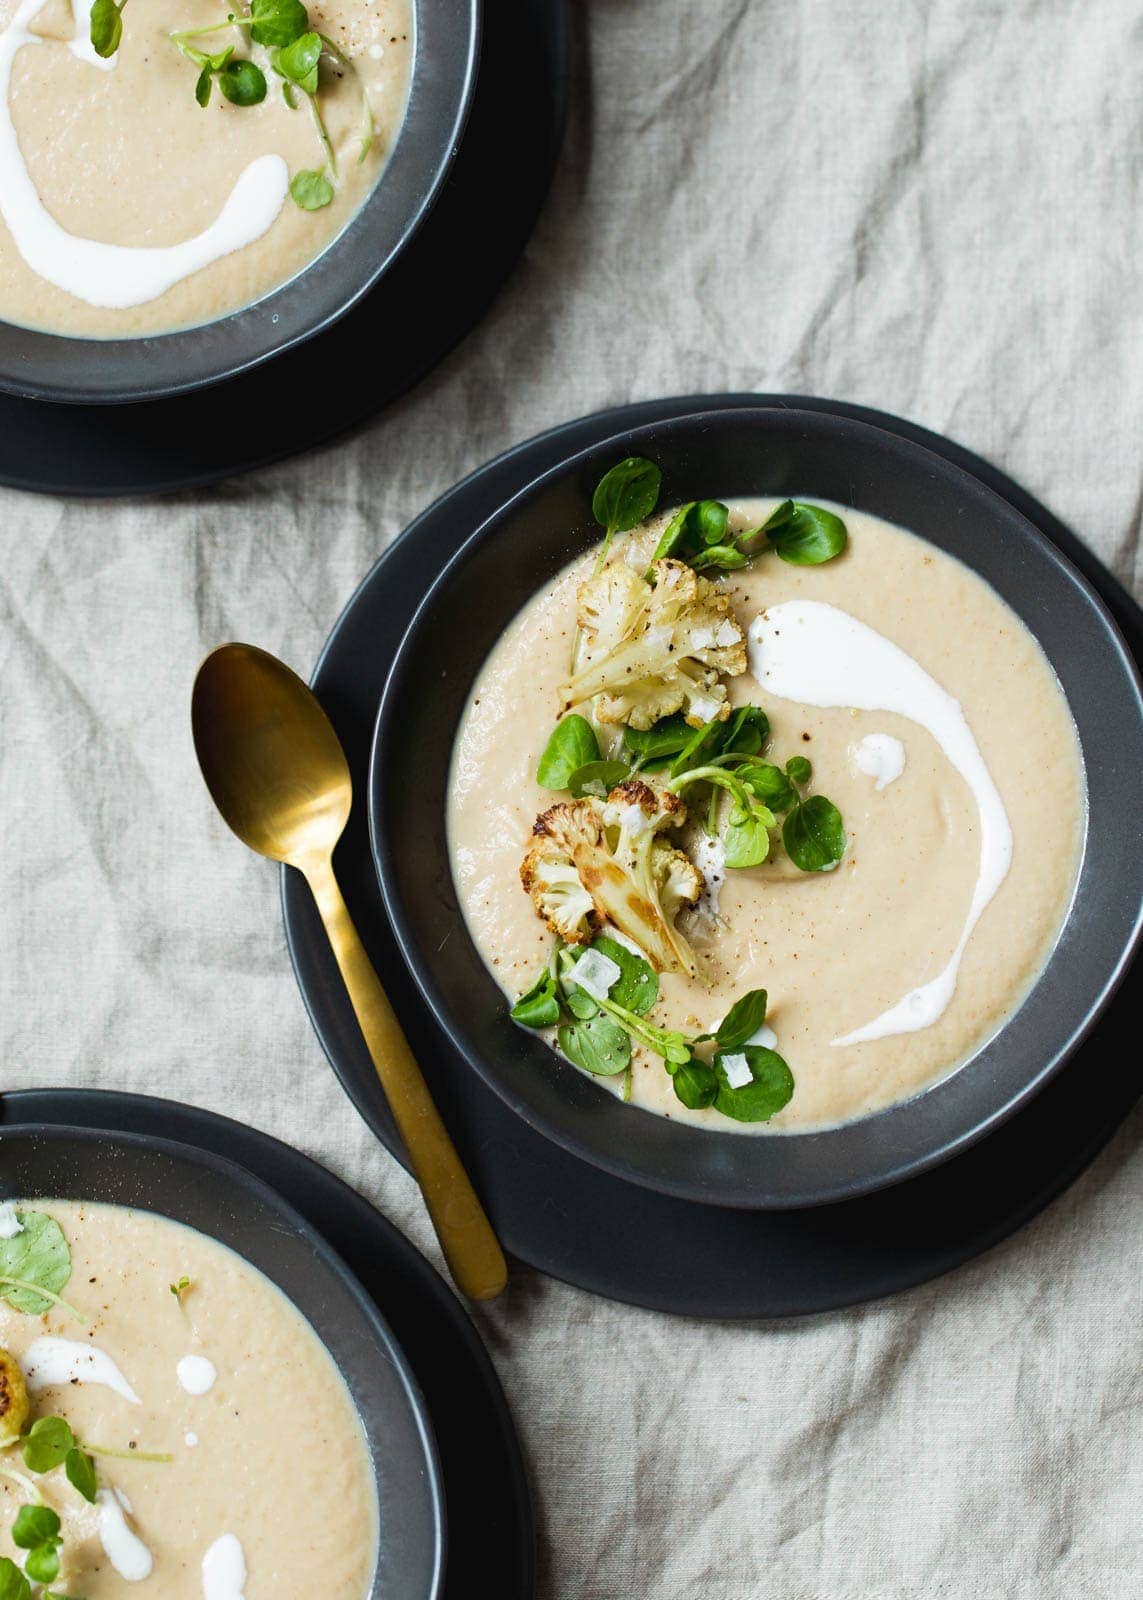 A healthy Cauliflower Soup made creamy from a secret ingredient with no added fat. Perfect warm or cold!